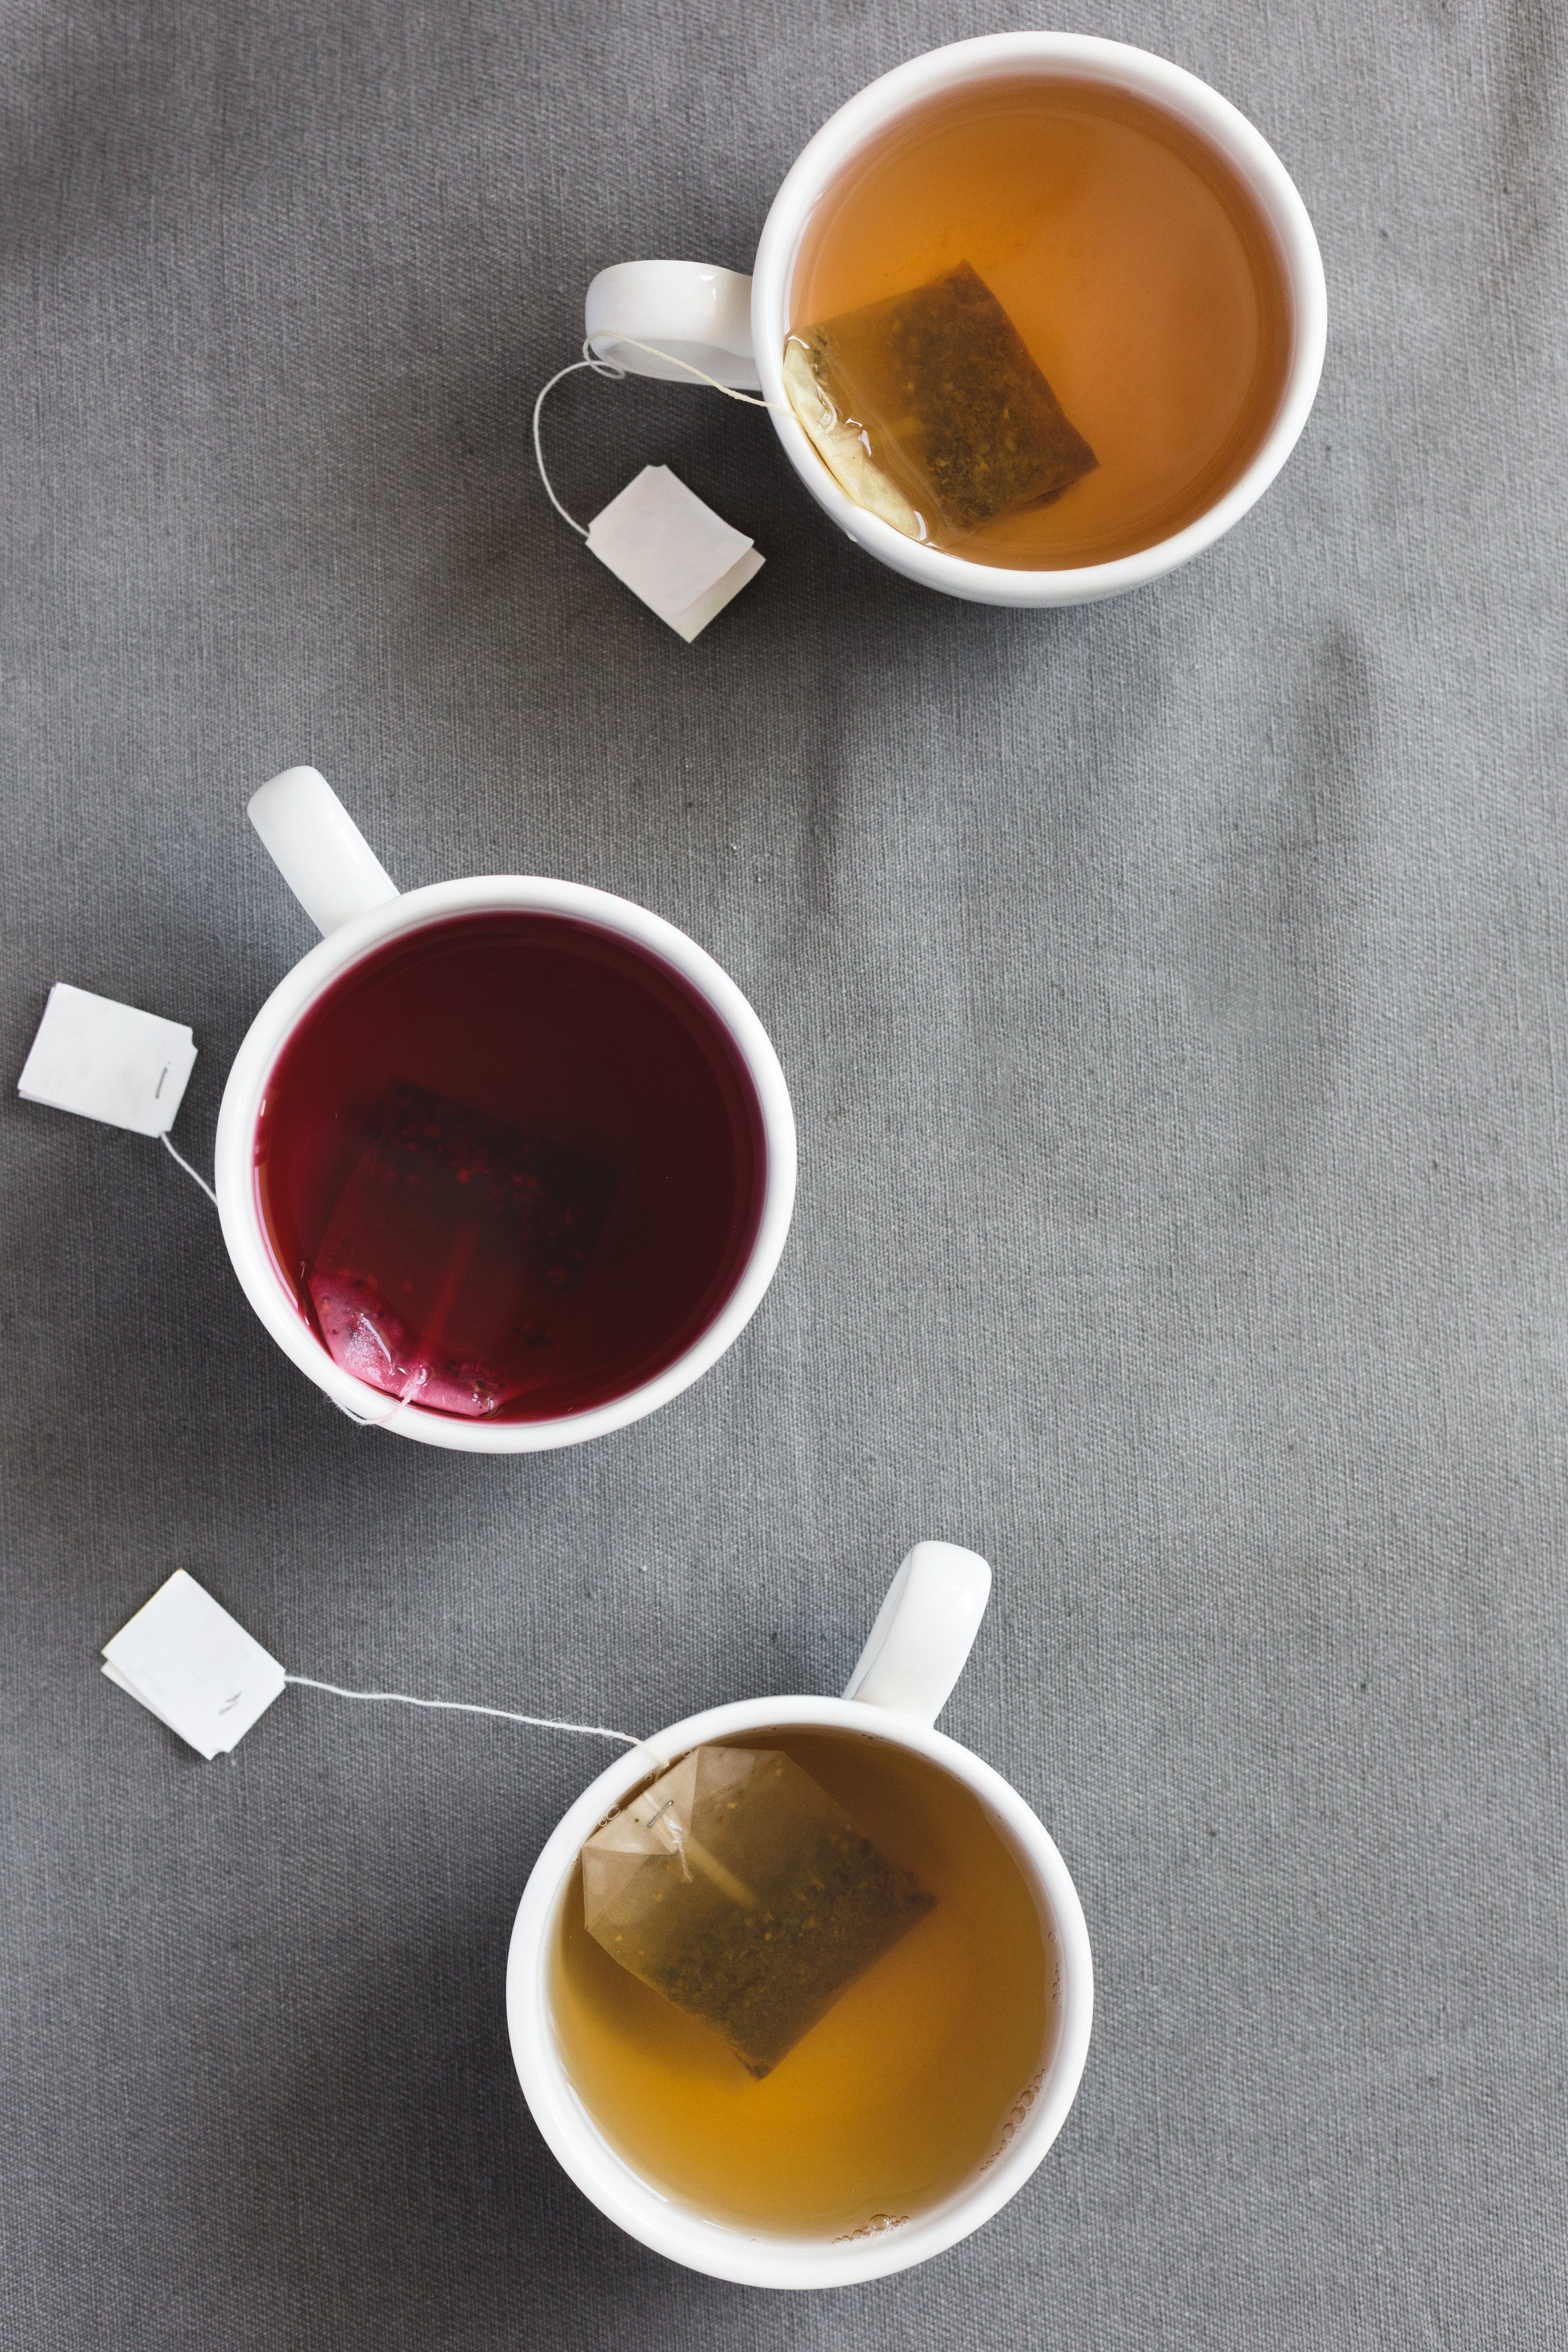 Welcome to Lineage & Leaf: Teas Steeped in Tradition and more!